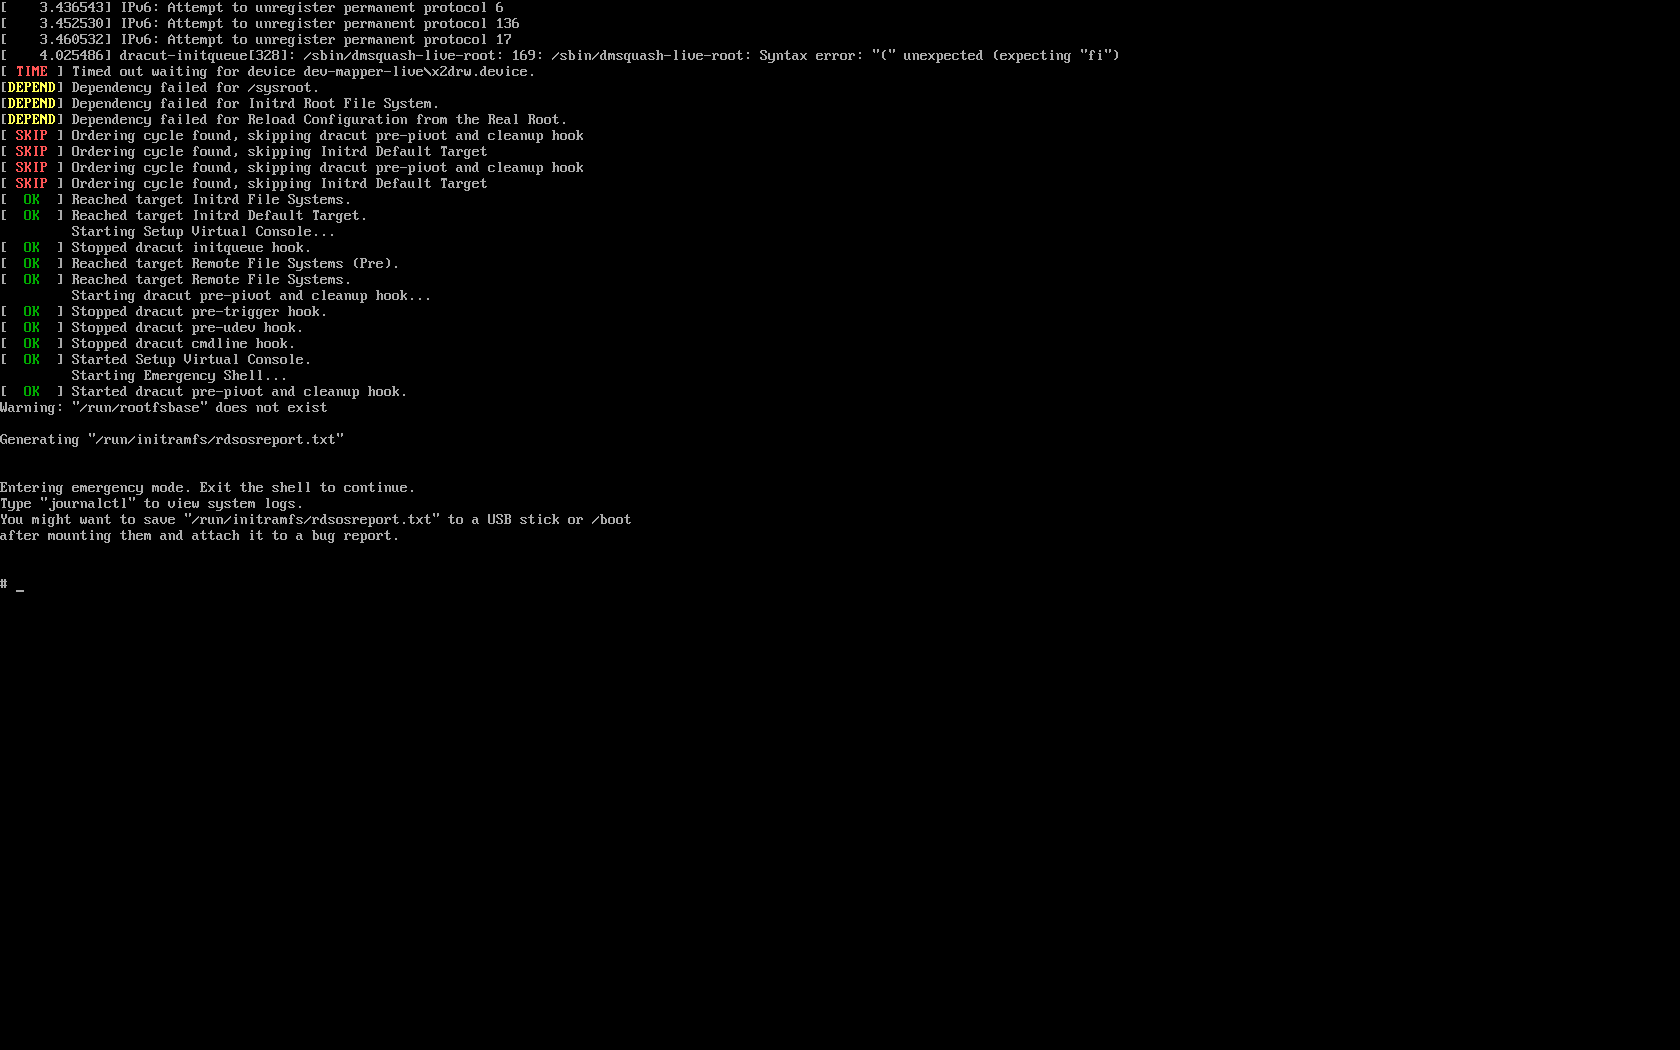 Cannot boot live initrd due to dmsquash-live-root.sh dash syntax error ...